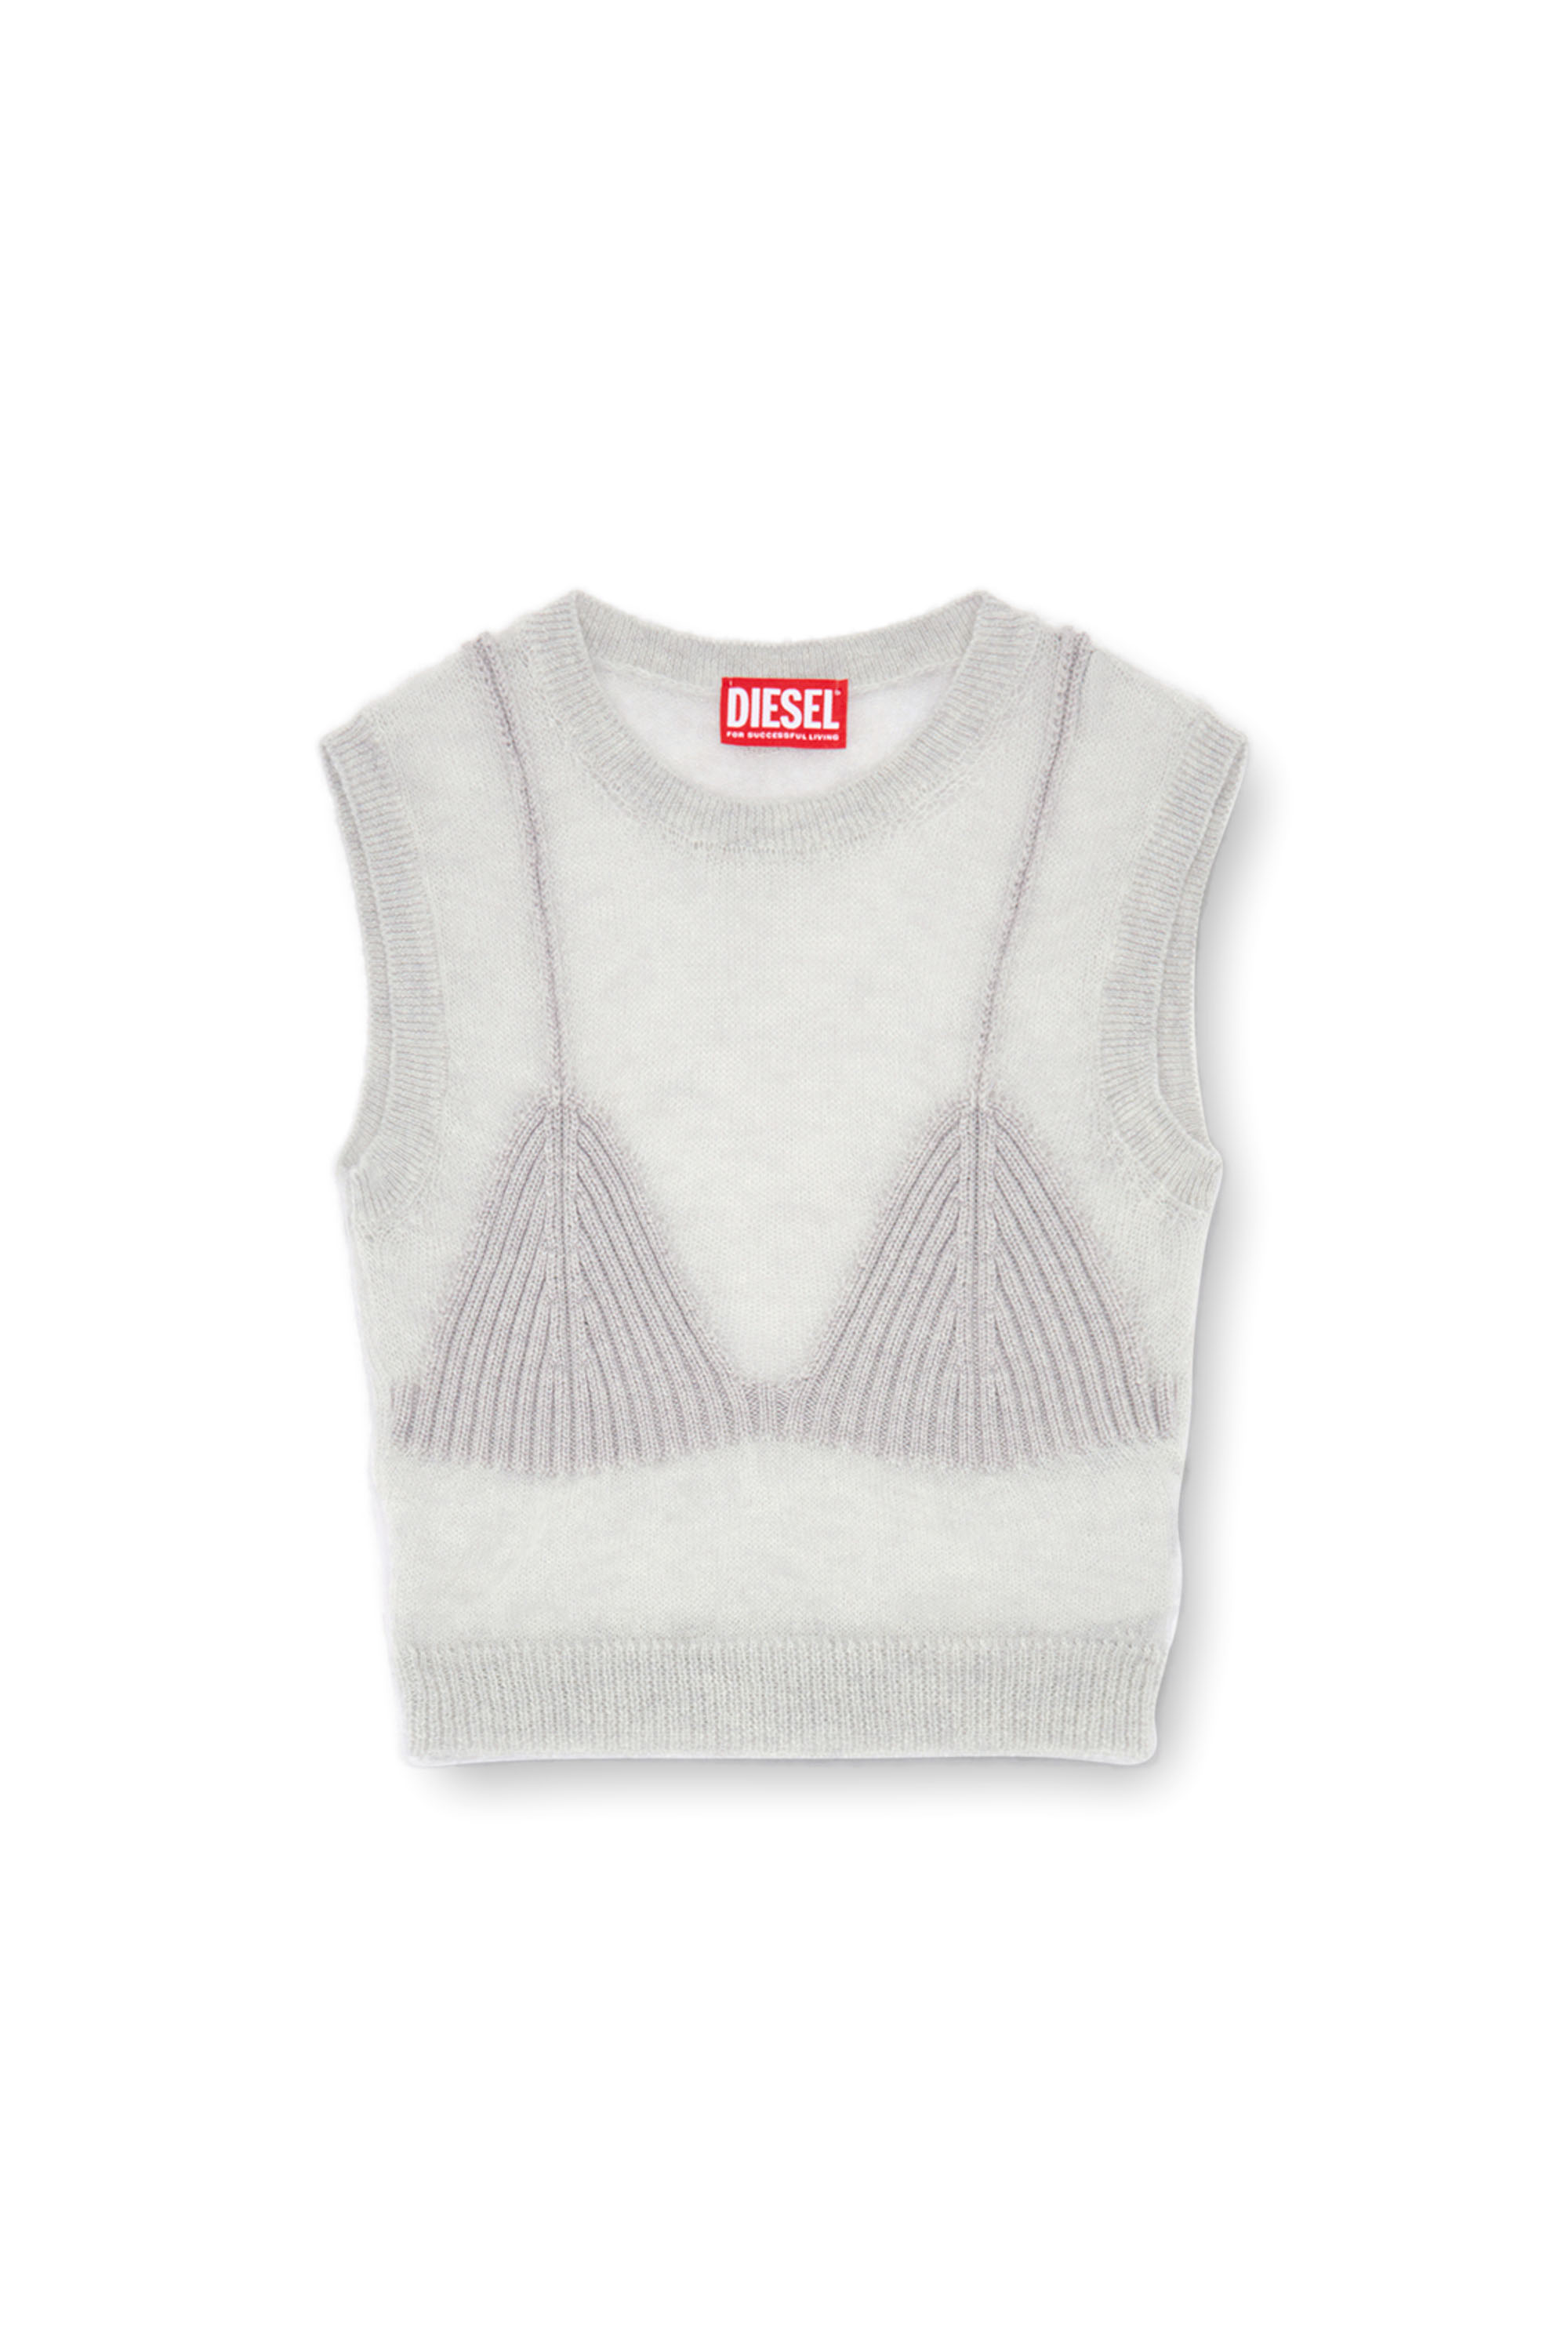 Diesel - M-AROSTICA, Female Sheer knit top with a bra detail in グレー - Image 3